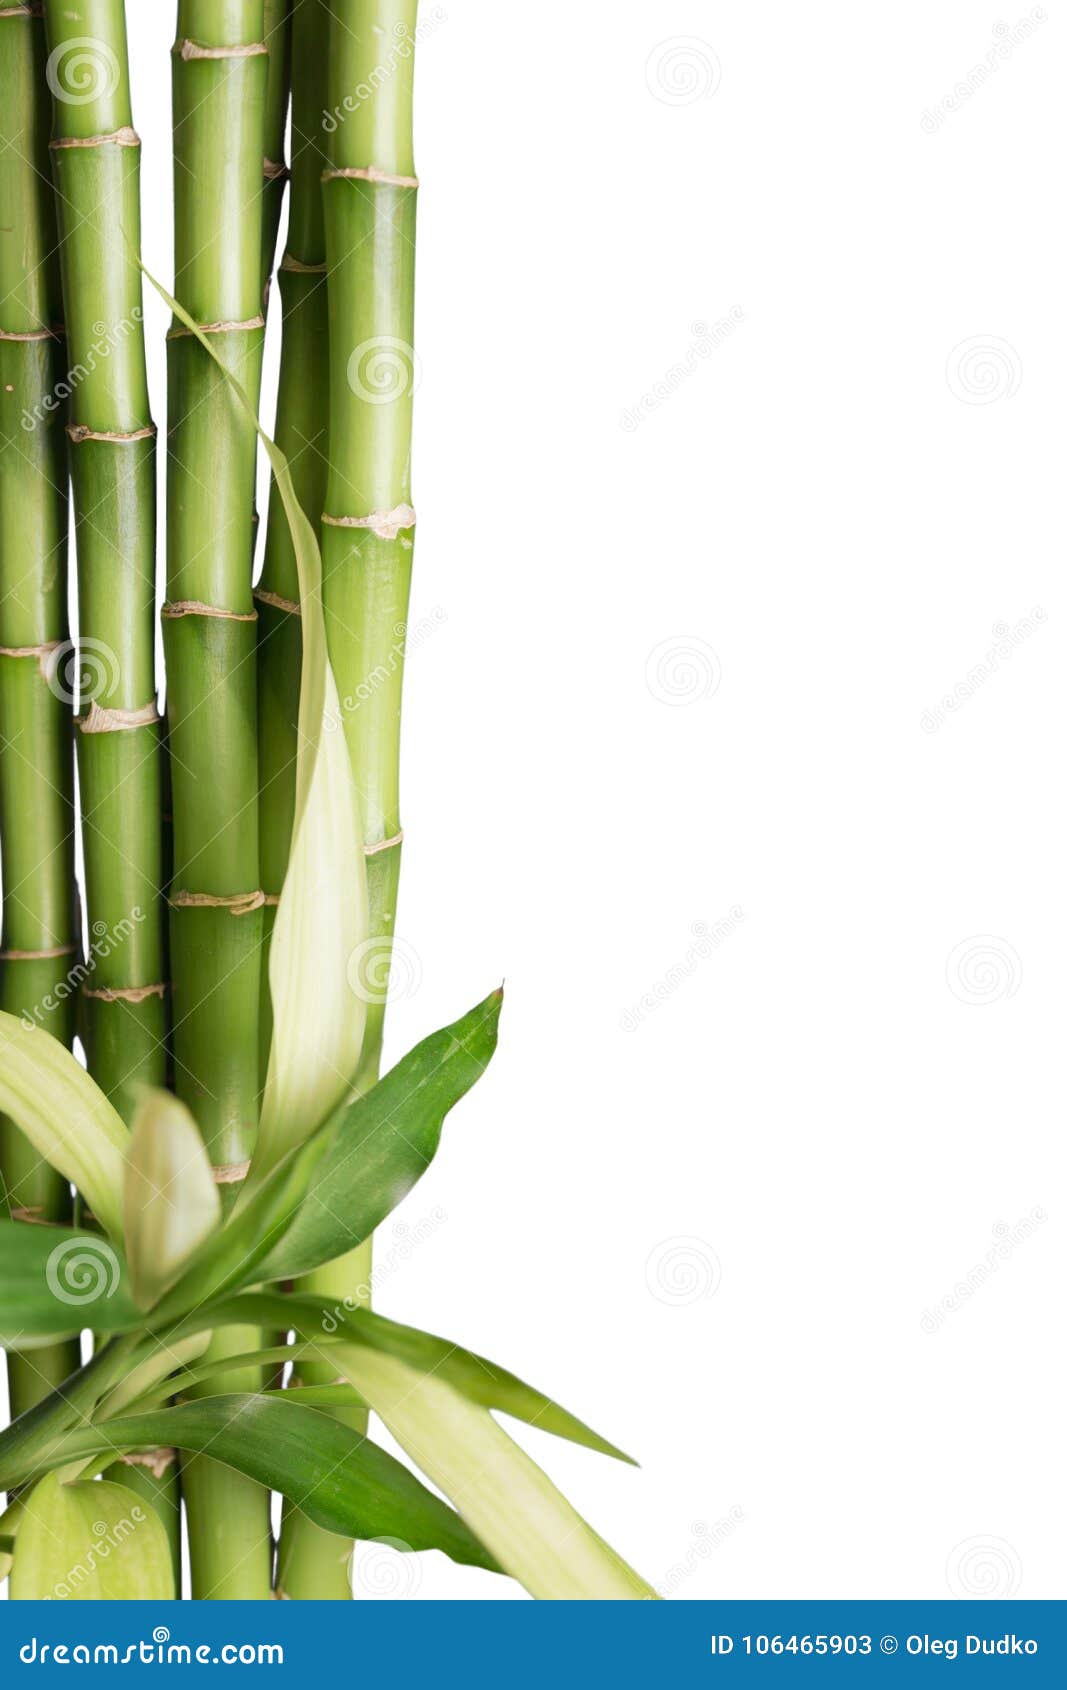 Many Bamboo Stalks on Background Stock Image - Image of close, abstract ...